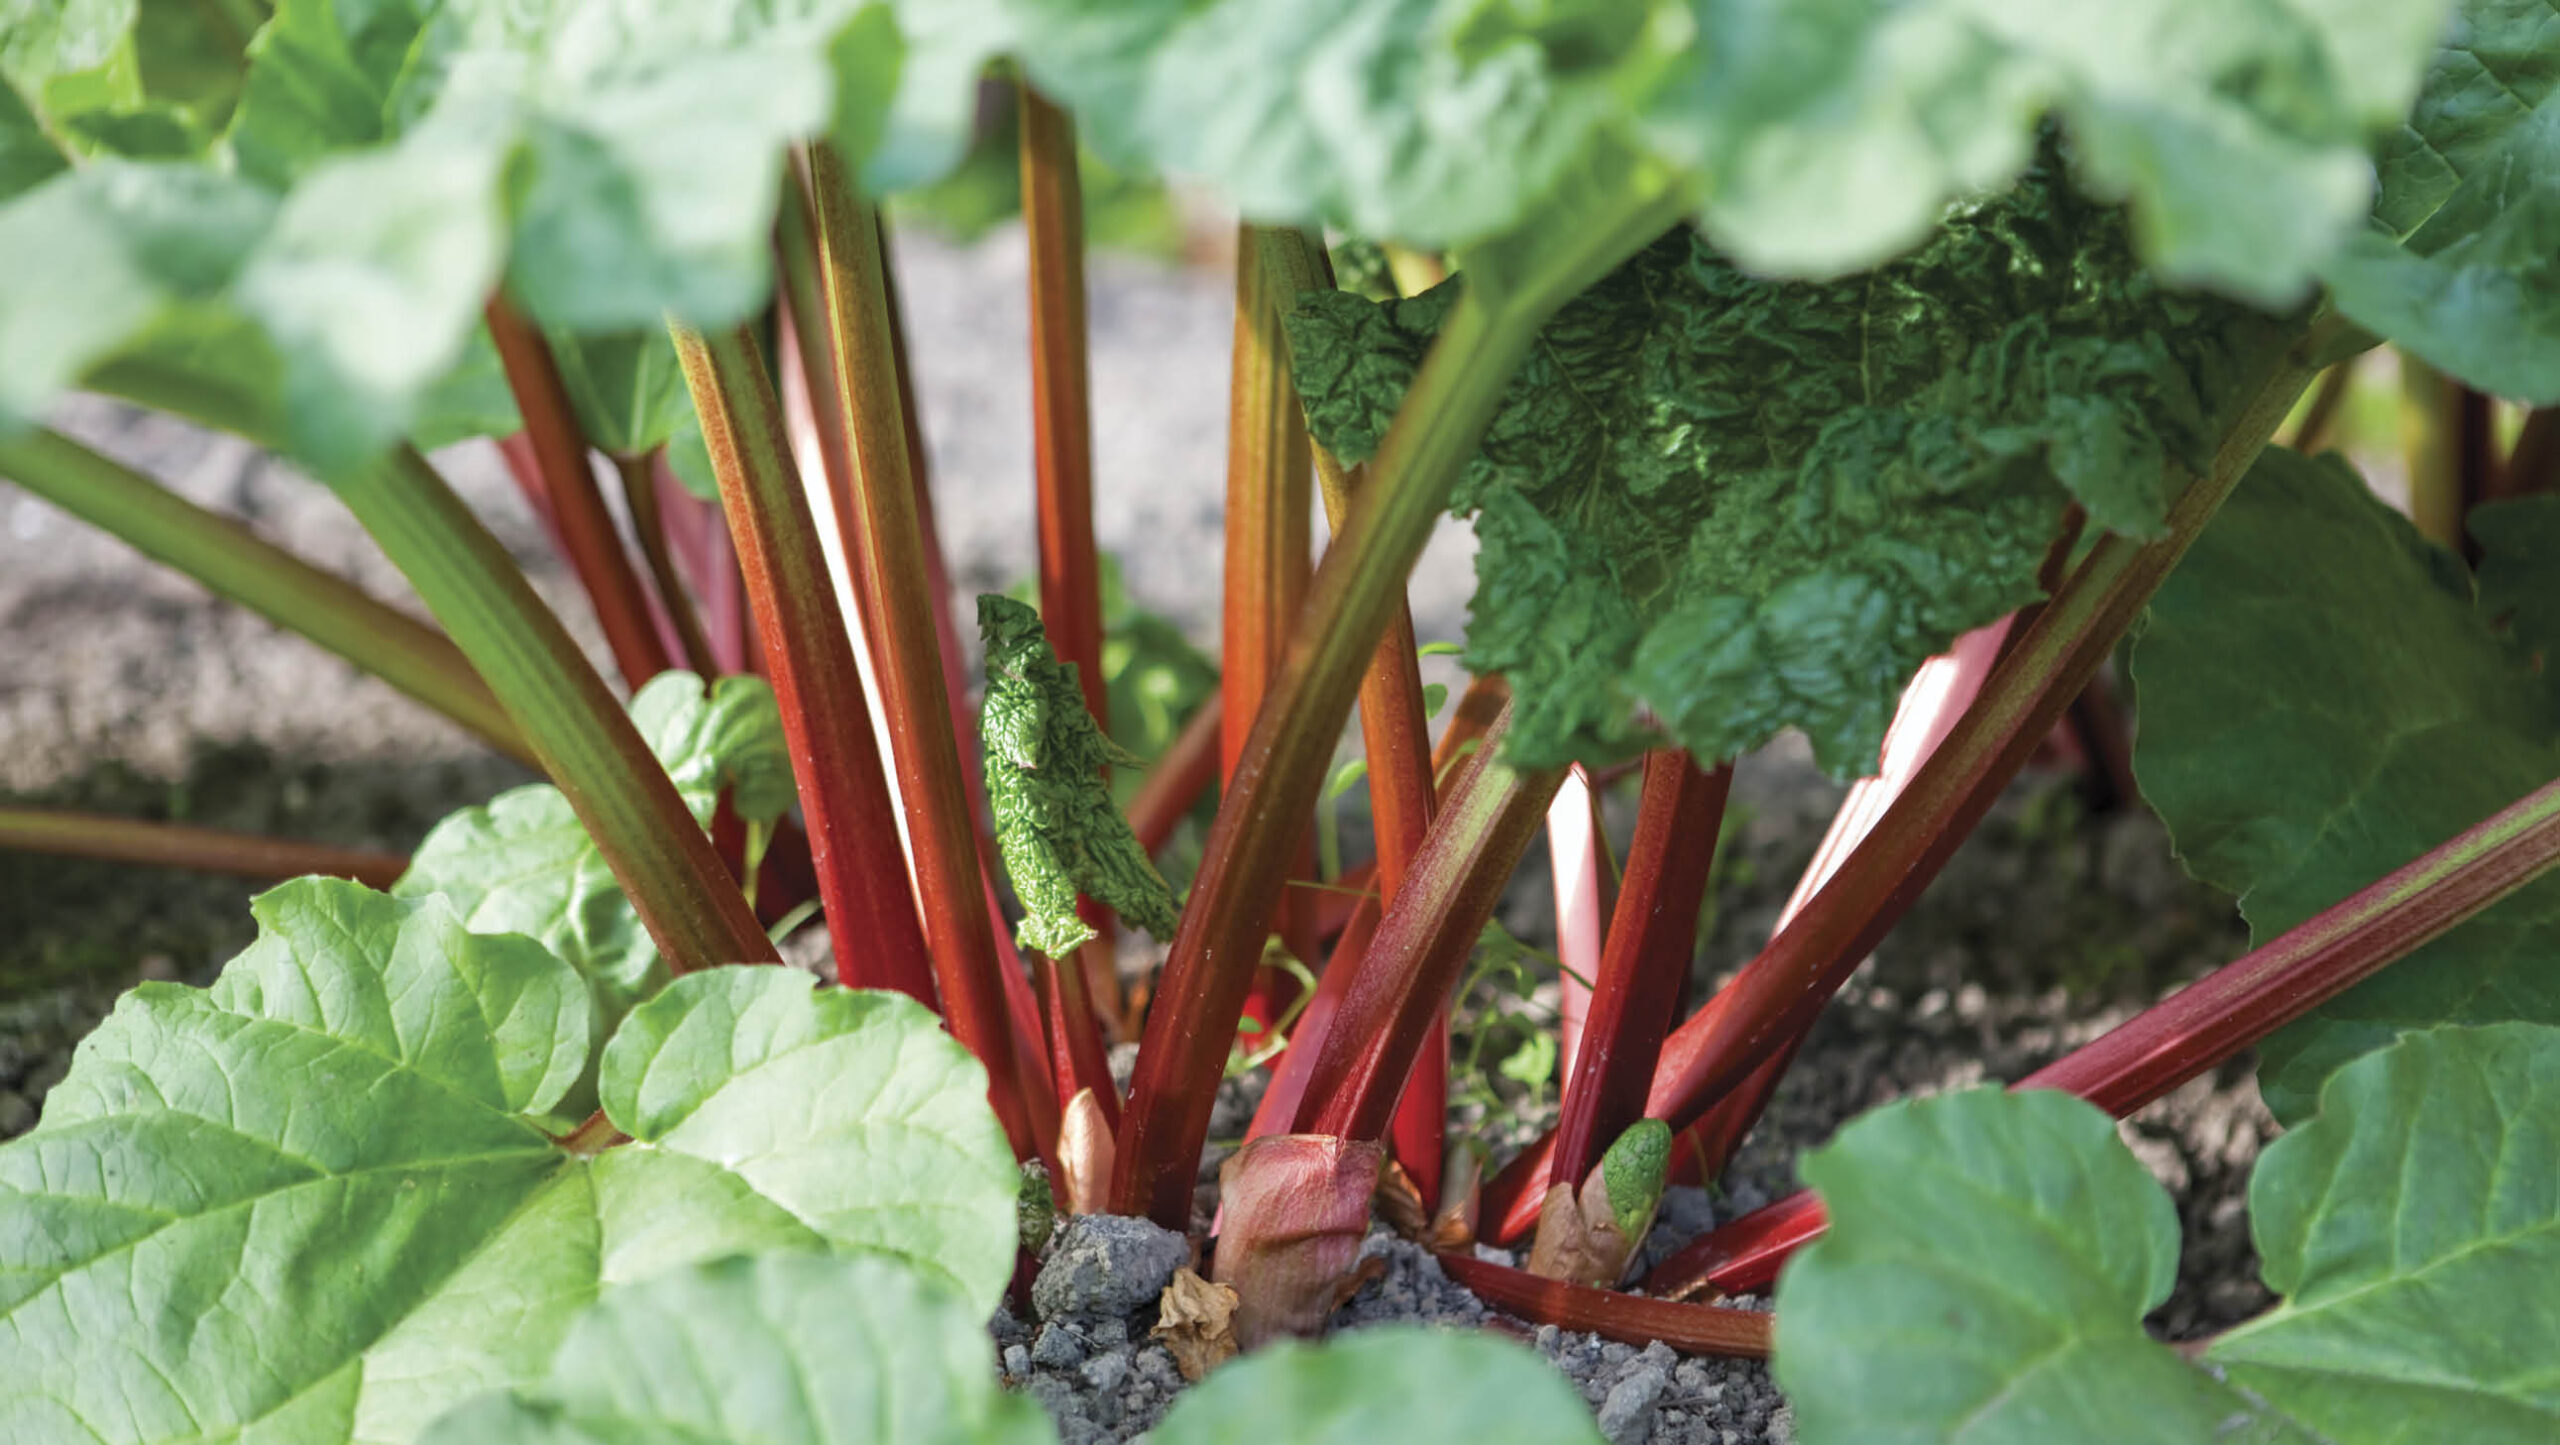 Only the stalks of rhubarb are edible.